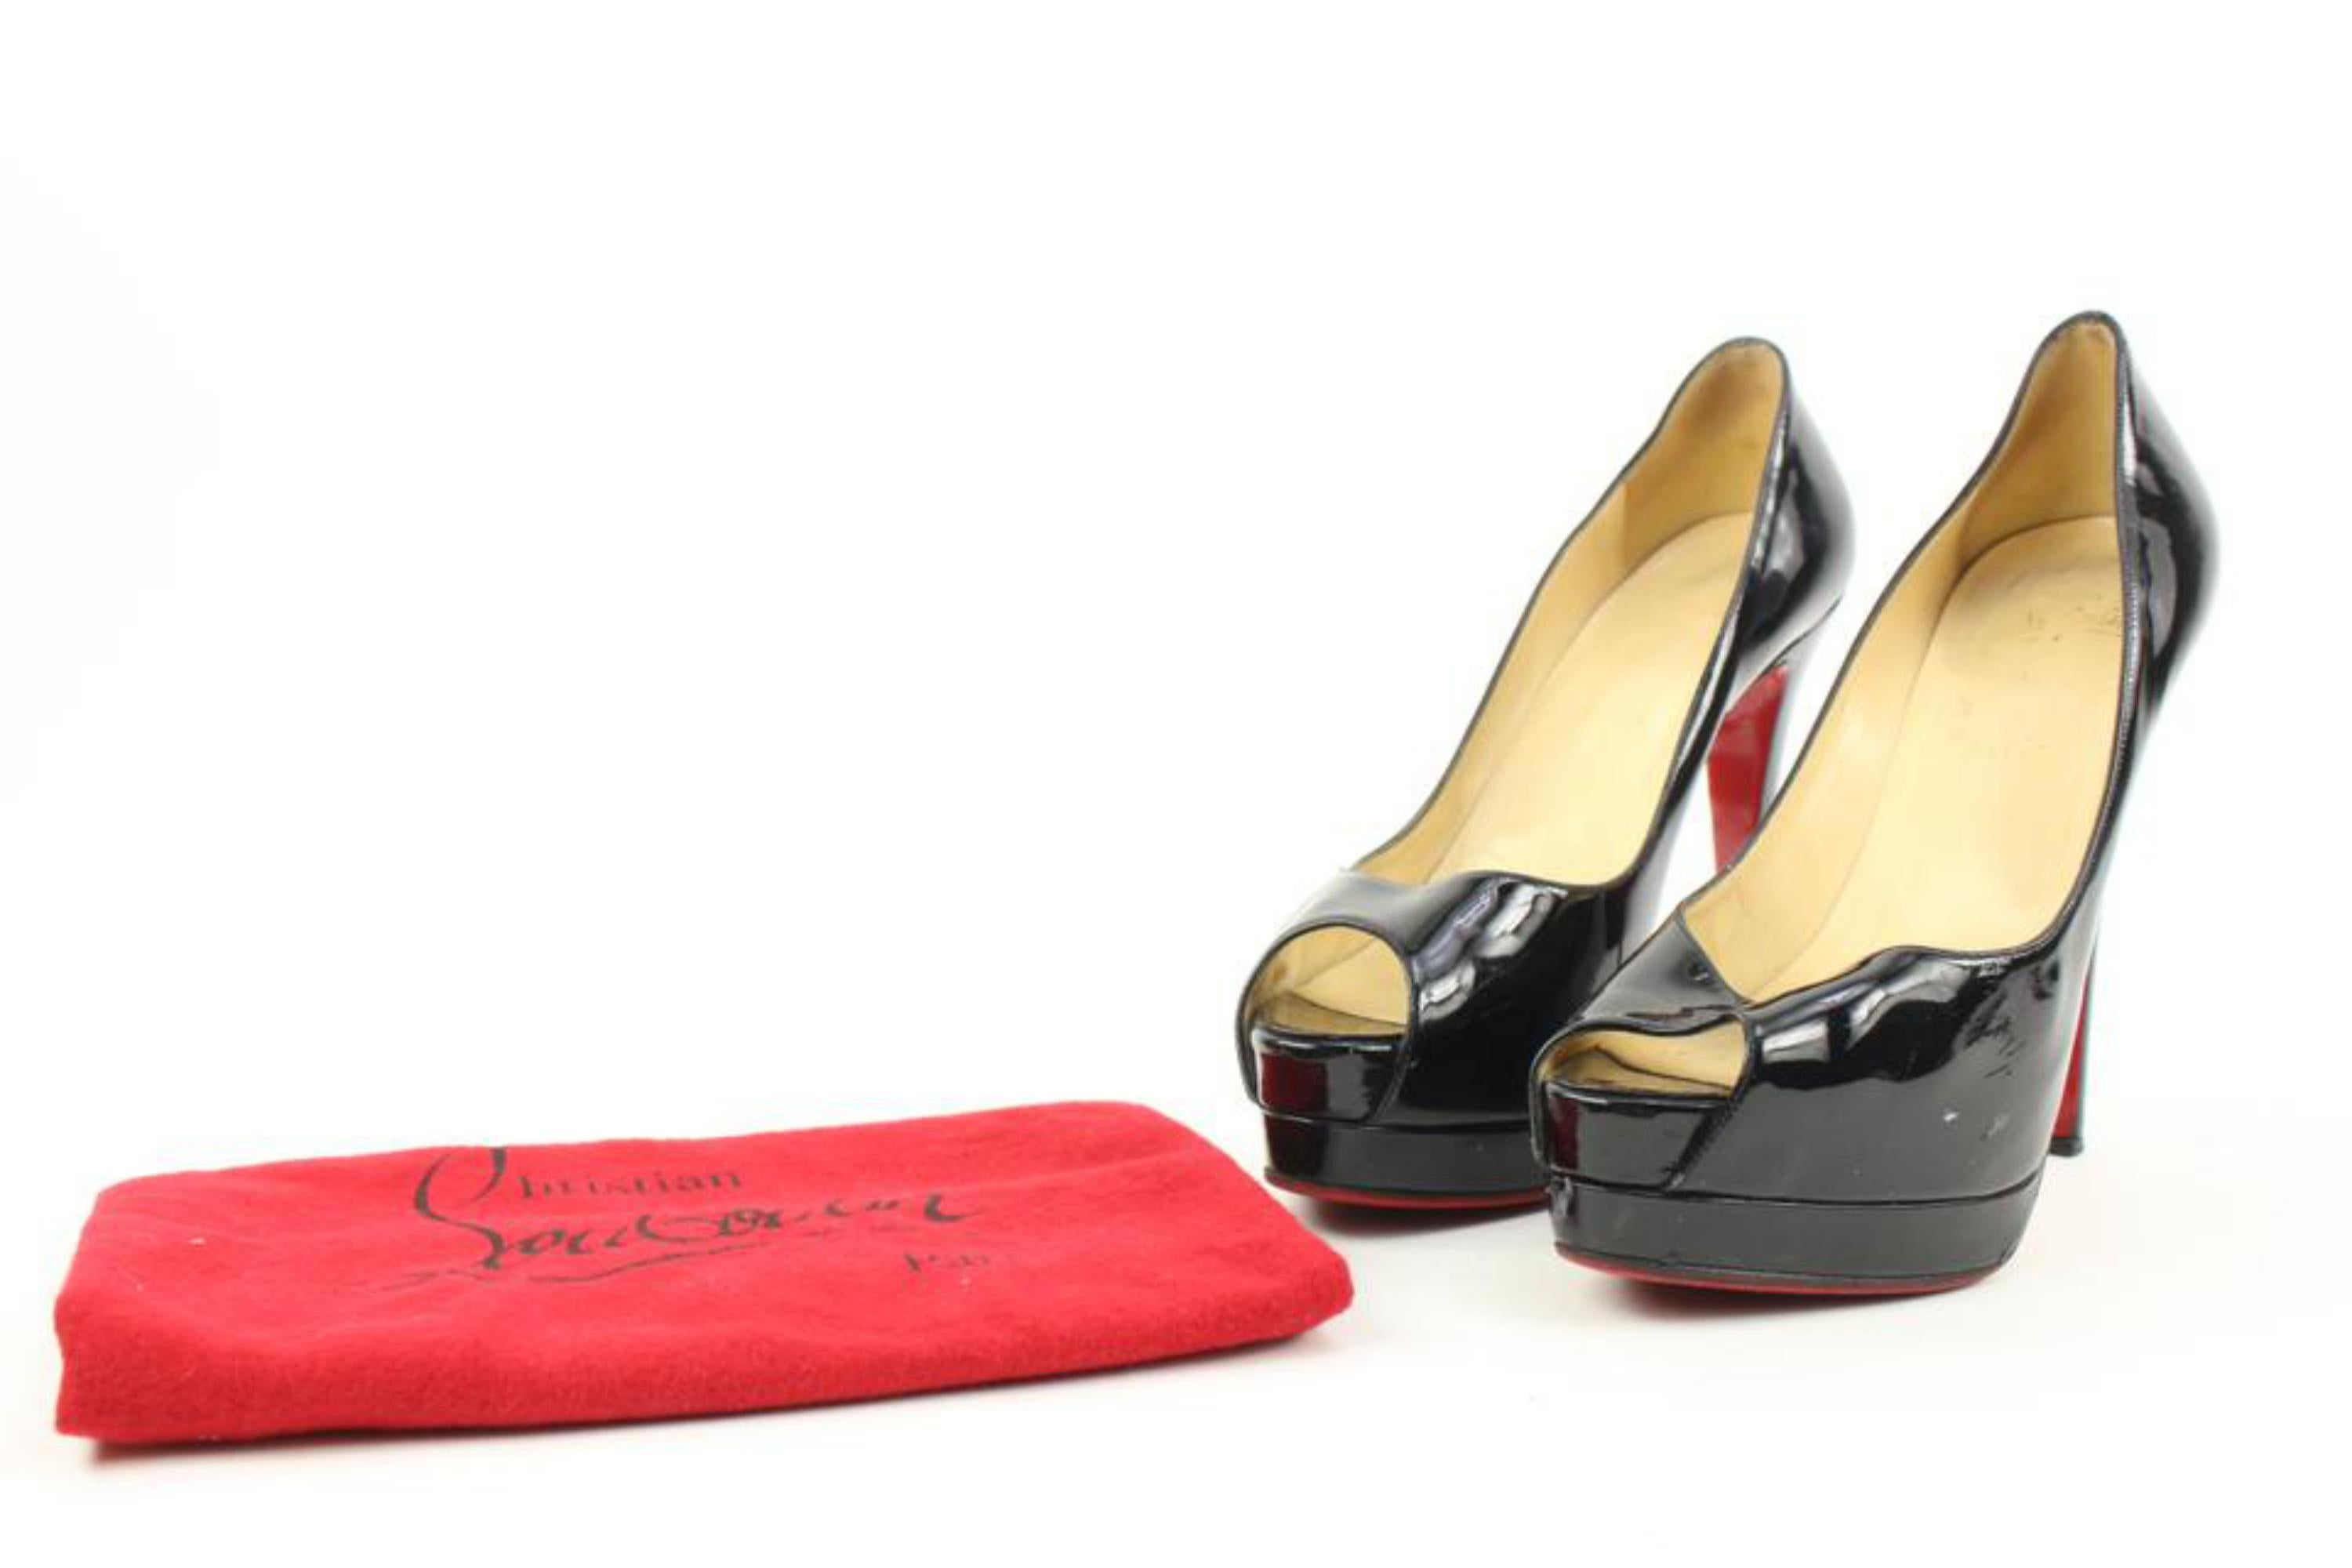 Christian Louboutin Size 40 Black Patent Leather Very Prive Open Toe Platforms 3CL119
Made In: Italy
Measurements: Length: 11 